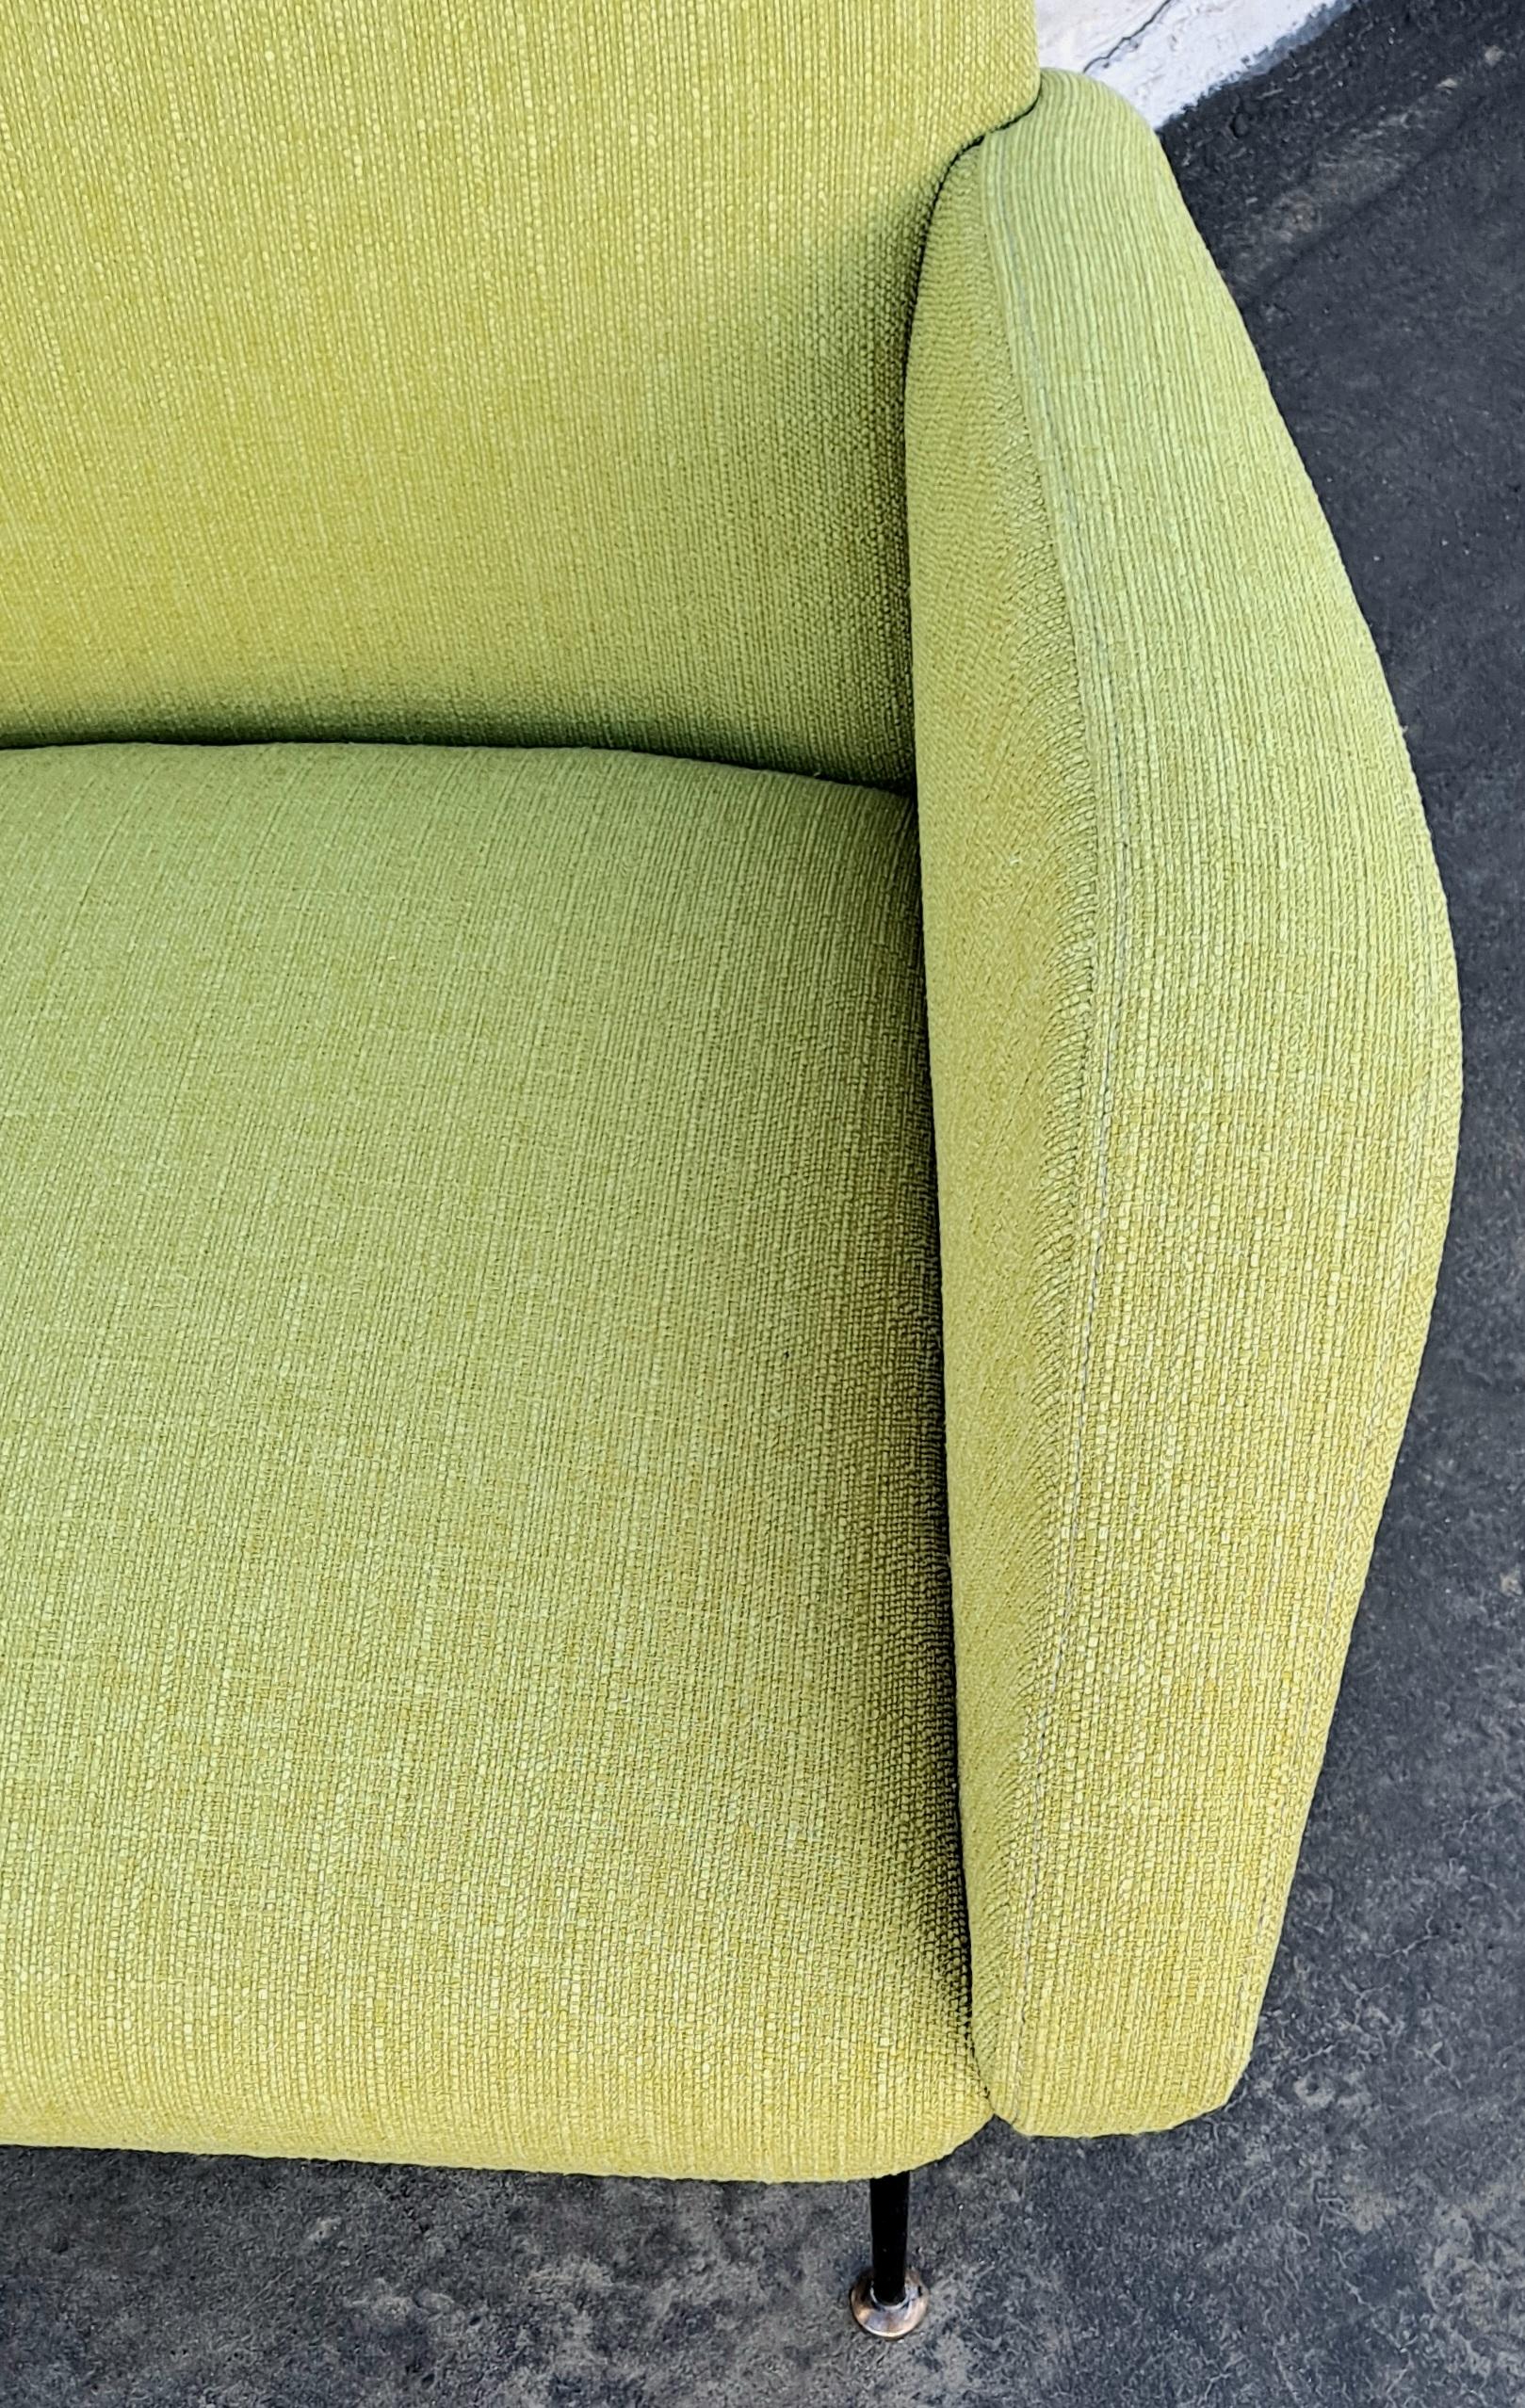 Midcentury Italian armchair In Good Condition For Sale In Los Angeles, CA